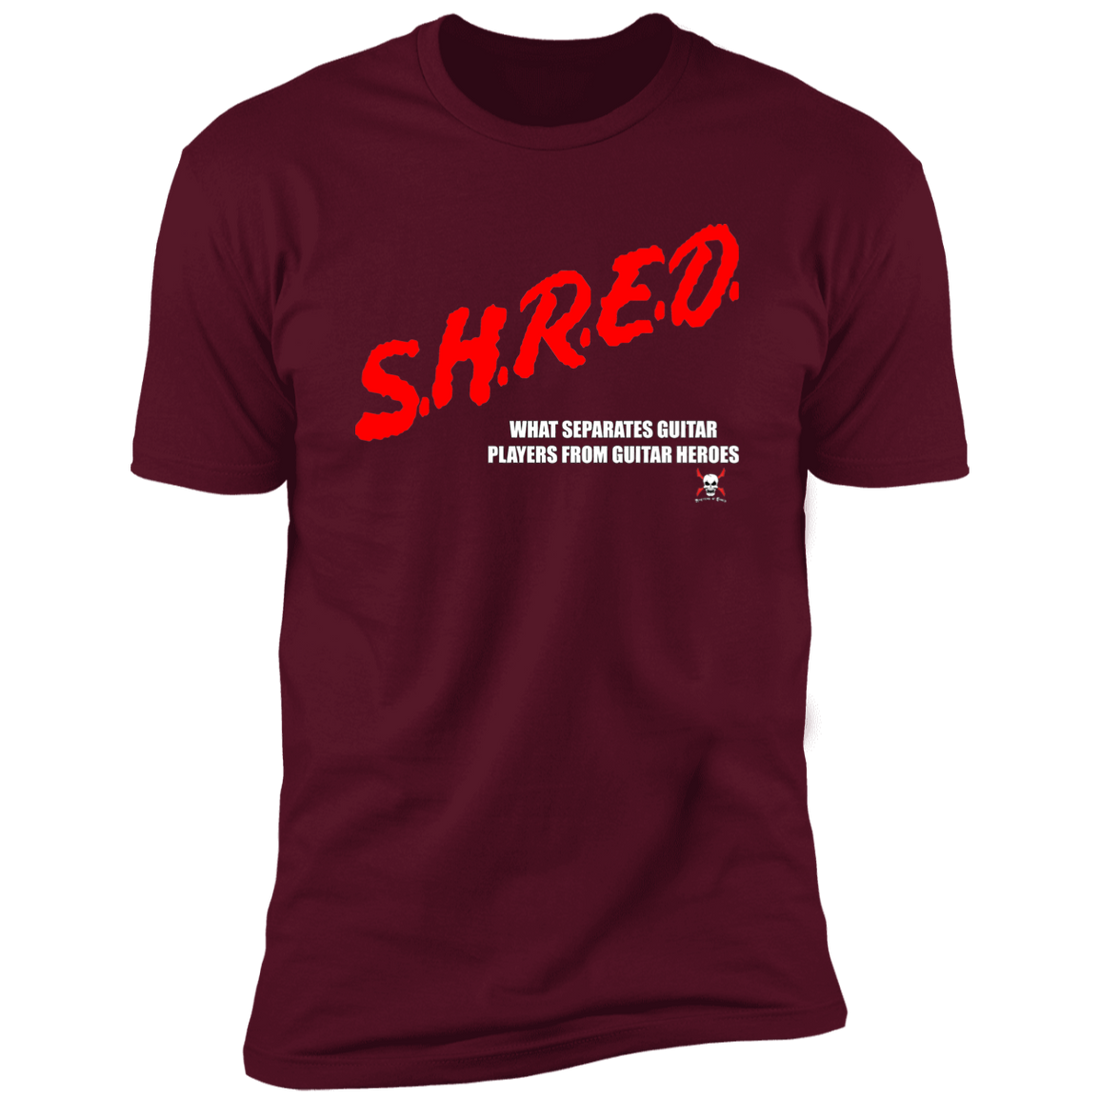 Dare to Shred Tees